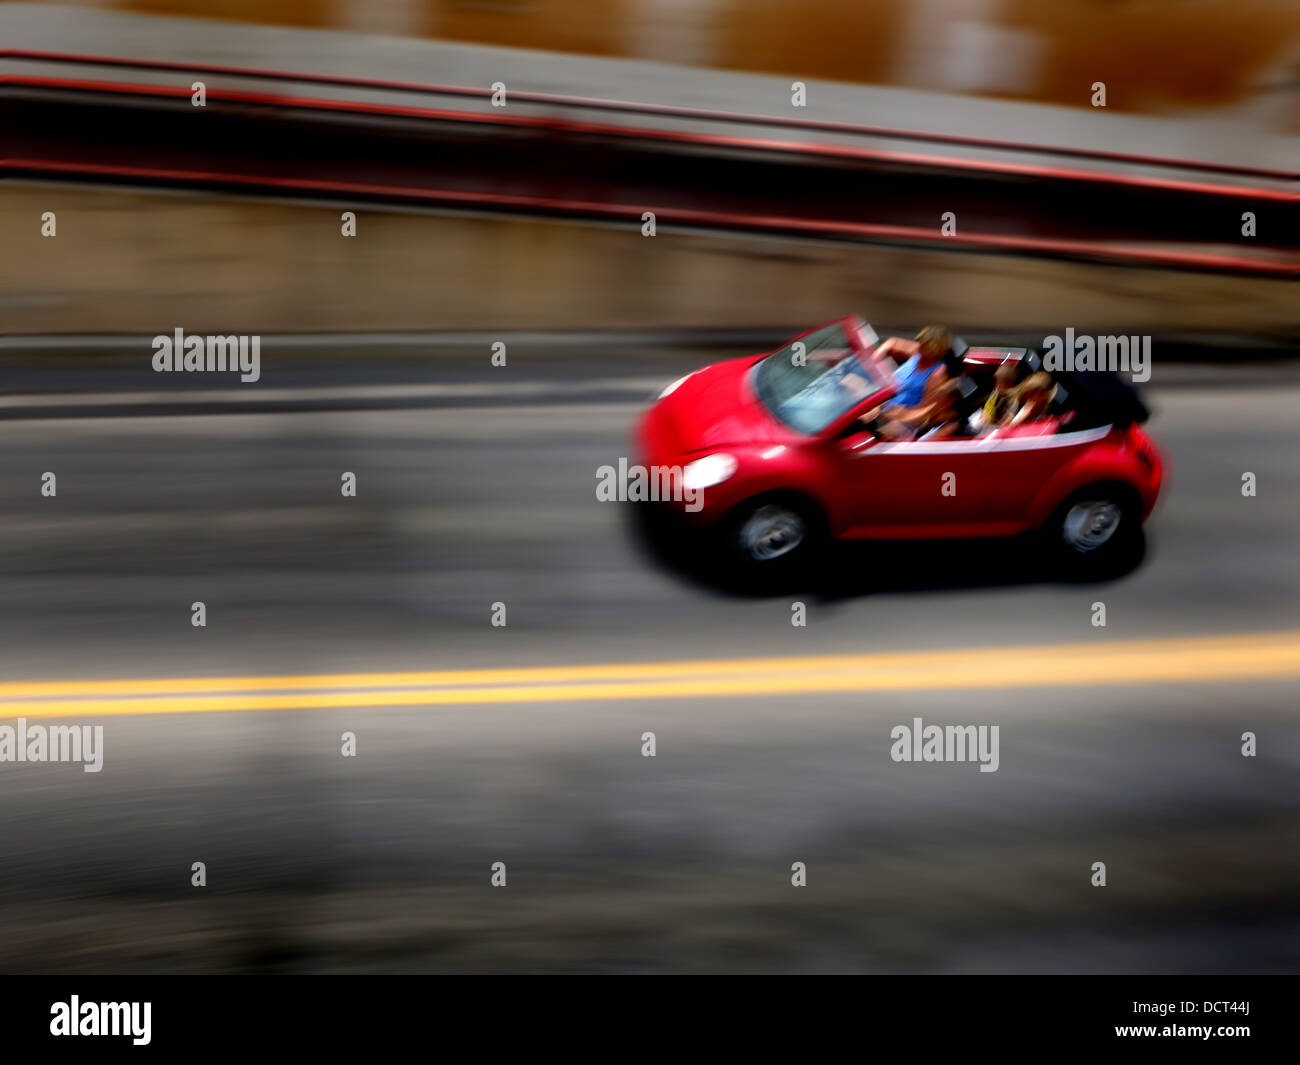 Red Car driving along road with blurred background Stock Photo